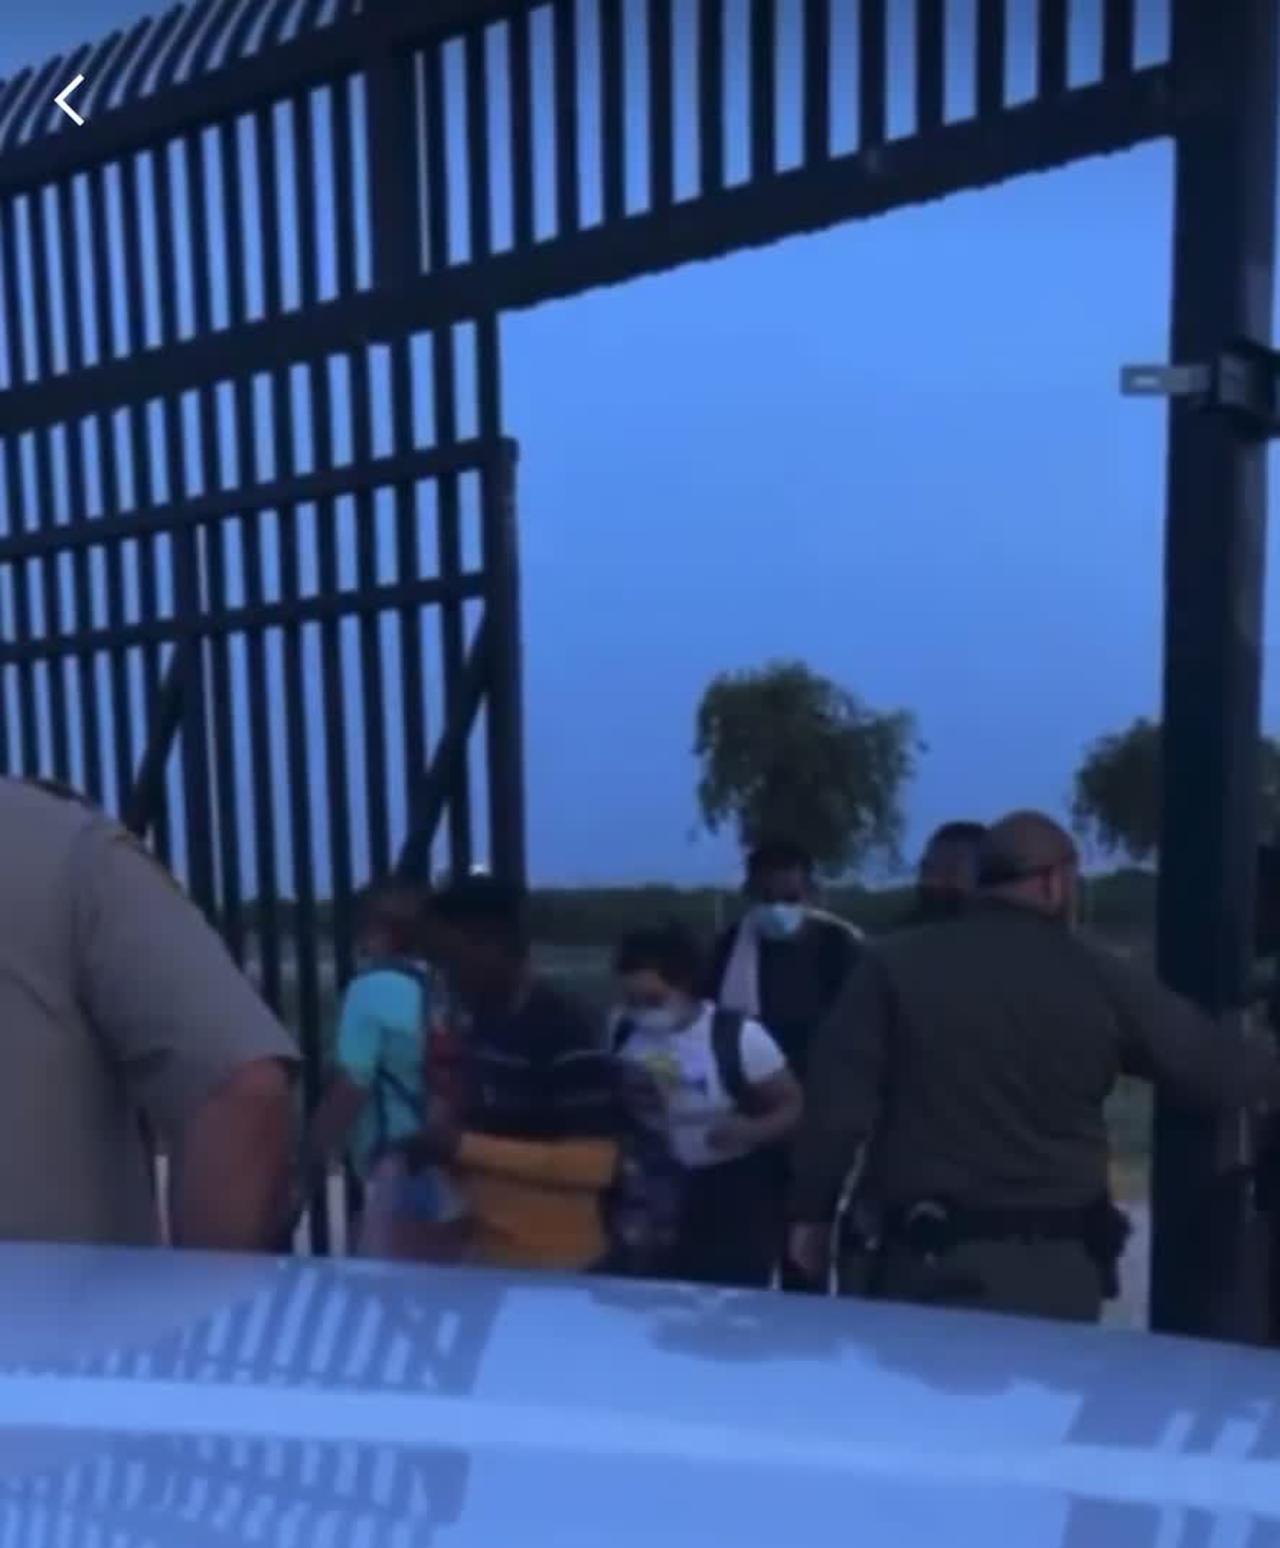 BORDER PATROL JUST OPENS THE GATE TO AMERICA. "THE BORDER IS SECURE"